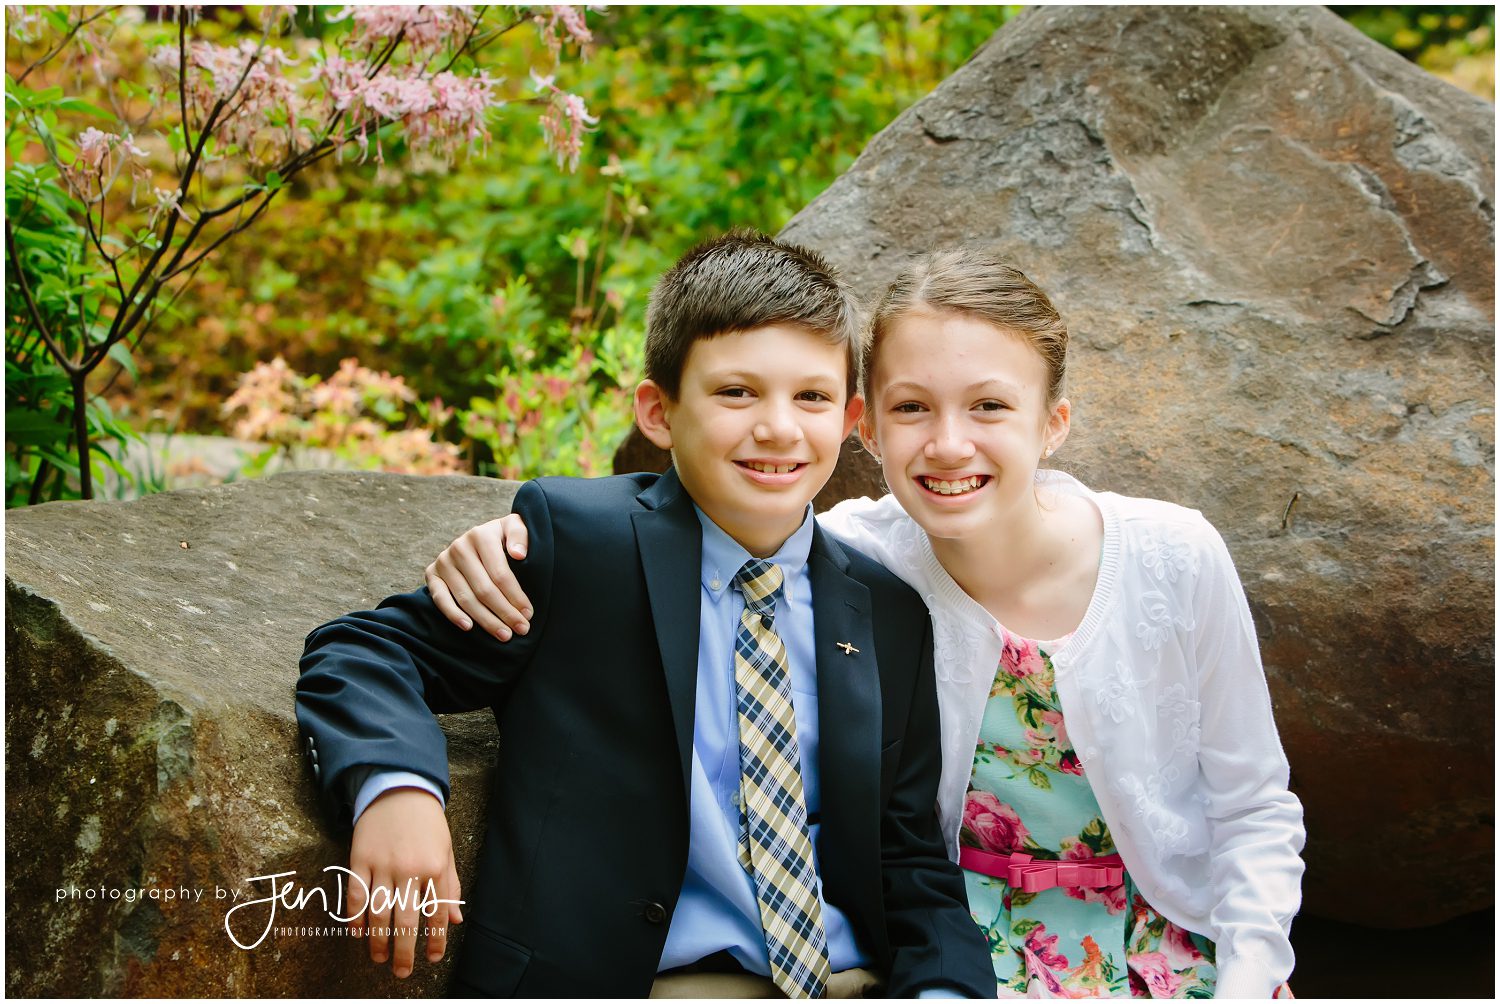 First Communion pictures for a boy